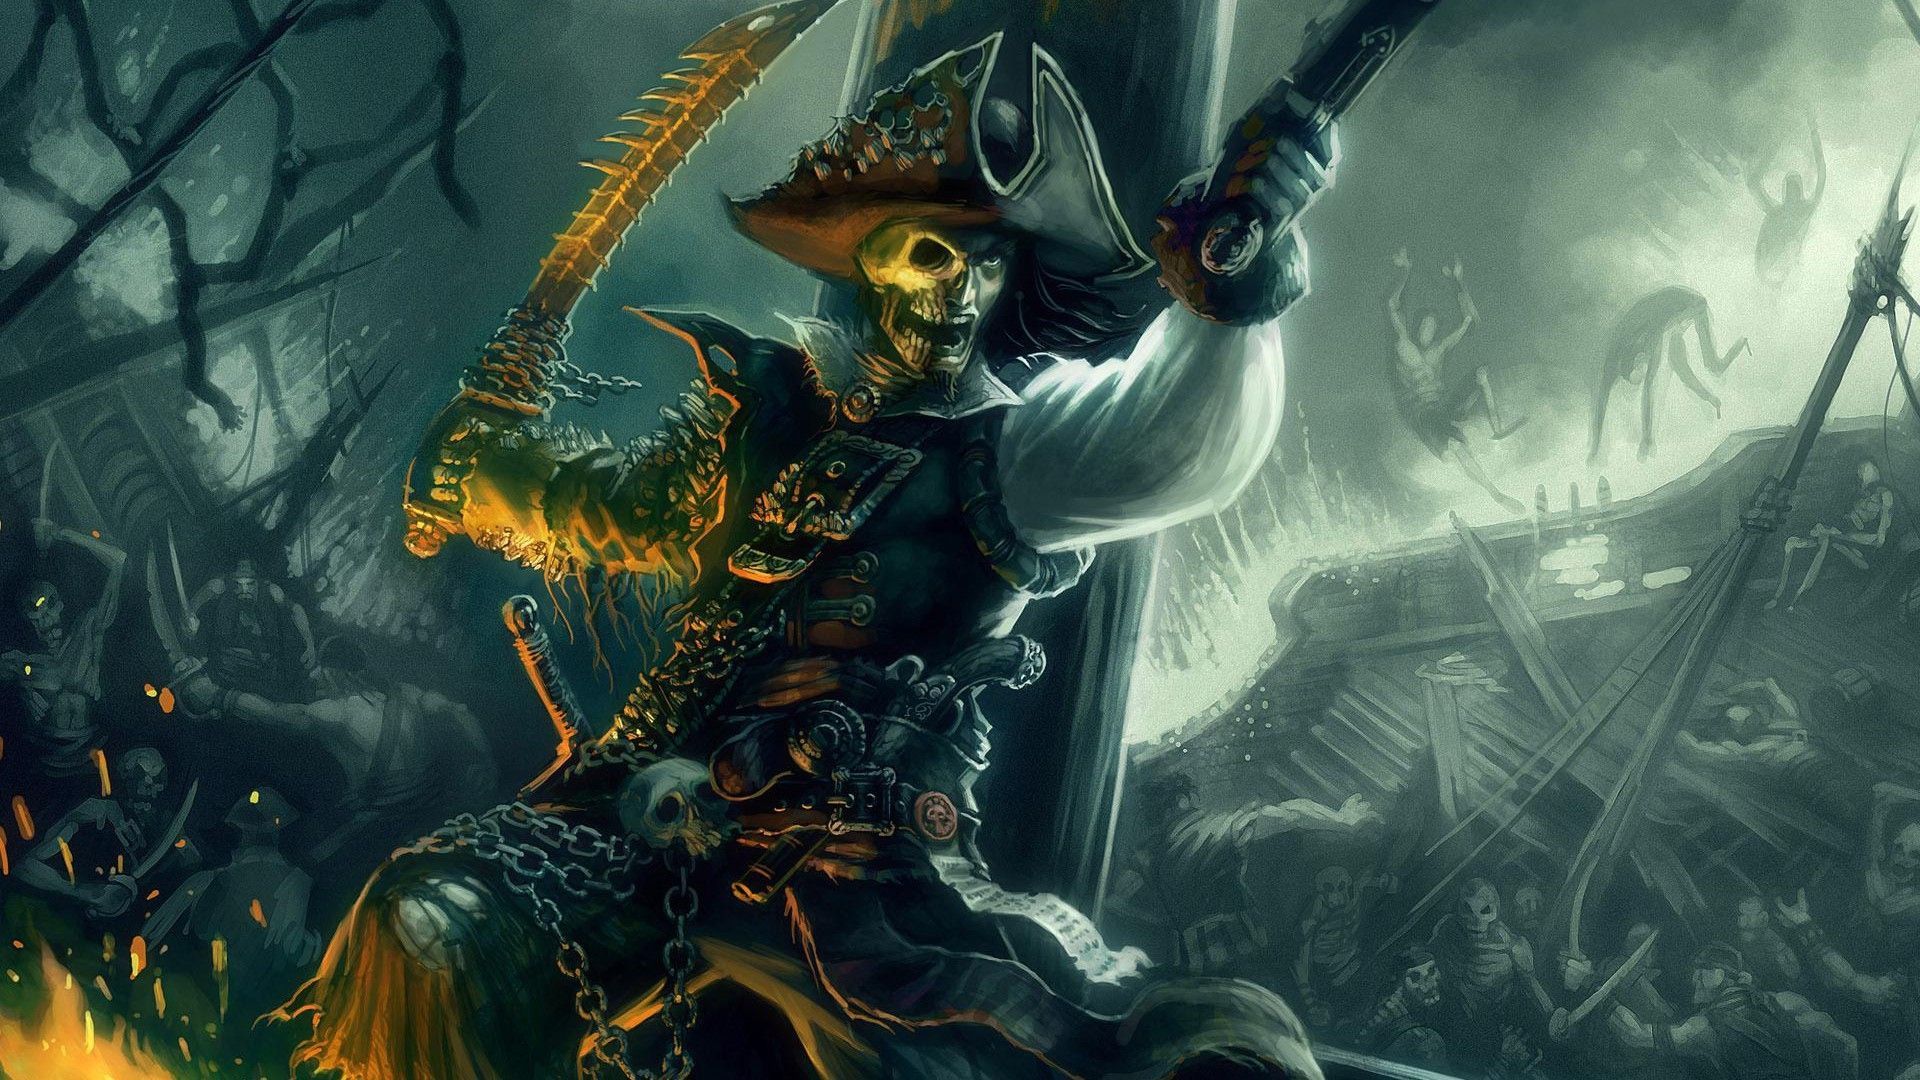 A pirate with his sword and hat - Pirate